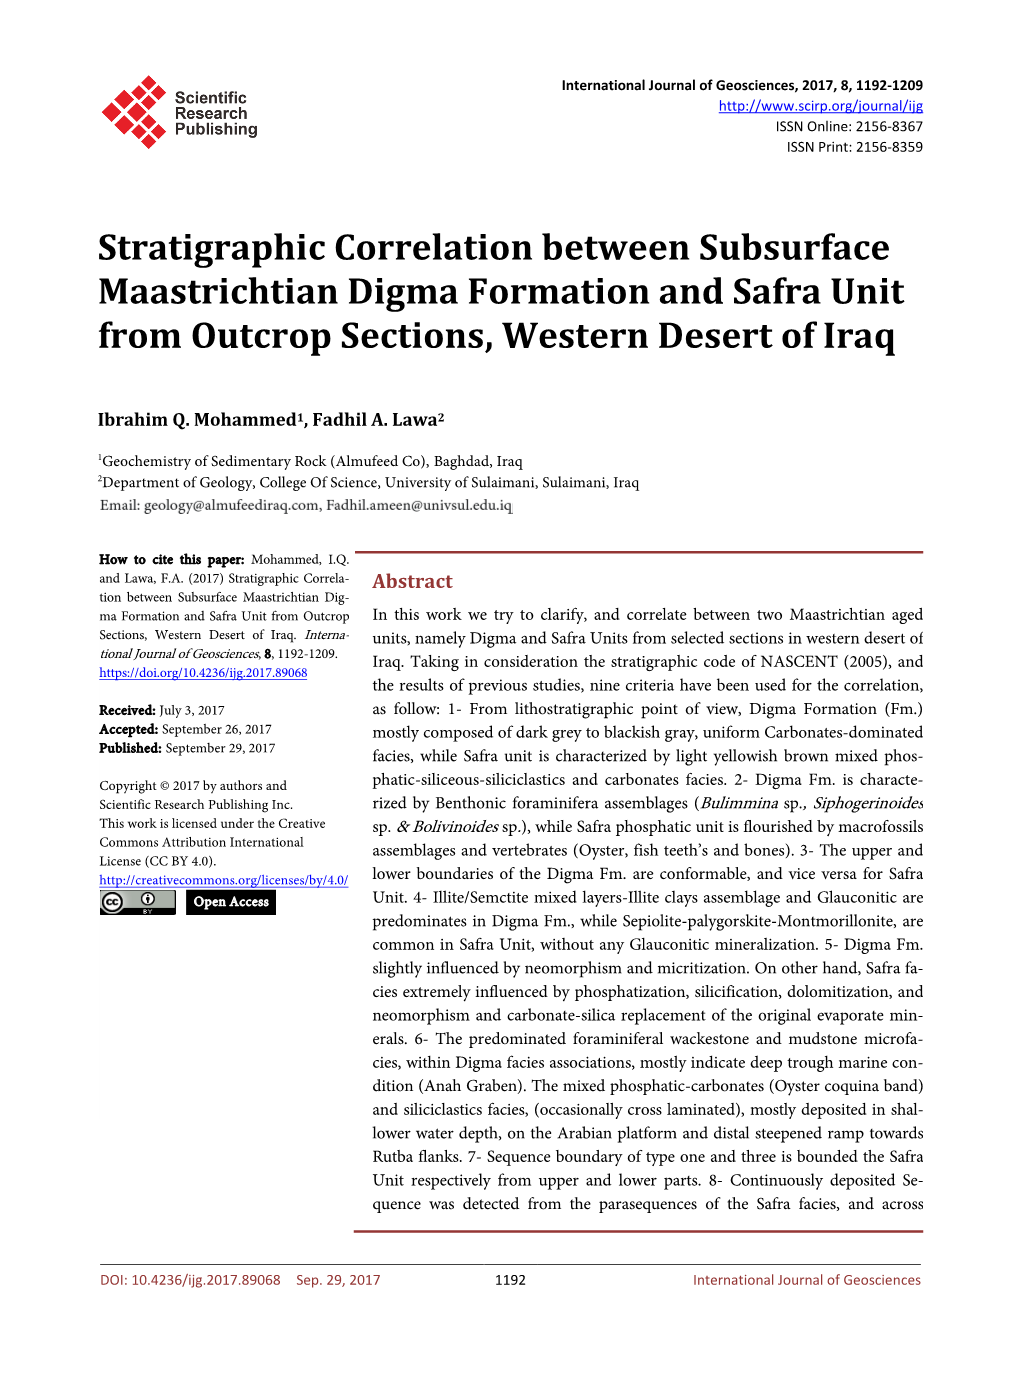 Stratigraphic Correlation Between Subsurface Maastrichtian Digma Formation and Safra Unit from Outcrop Sections, Western Desert of Iraq